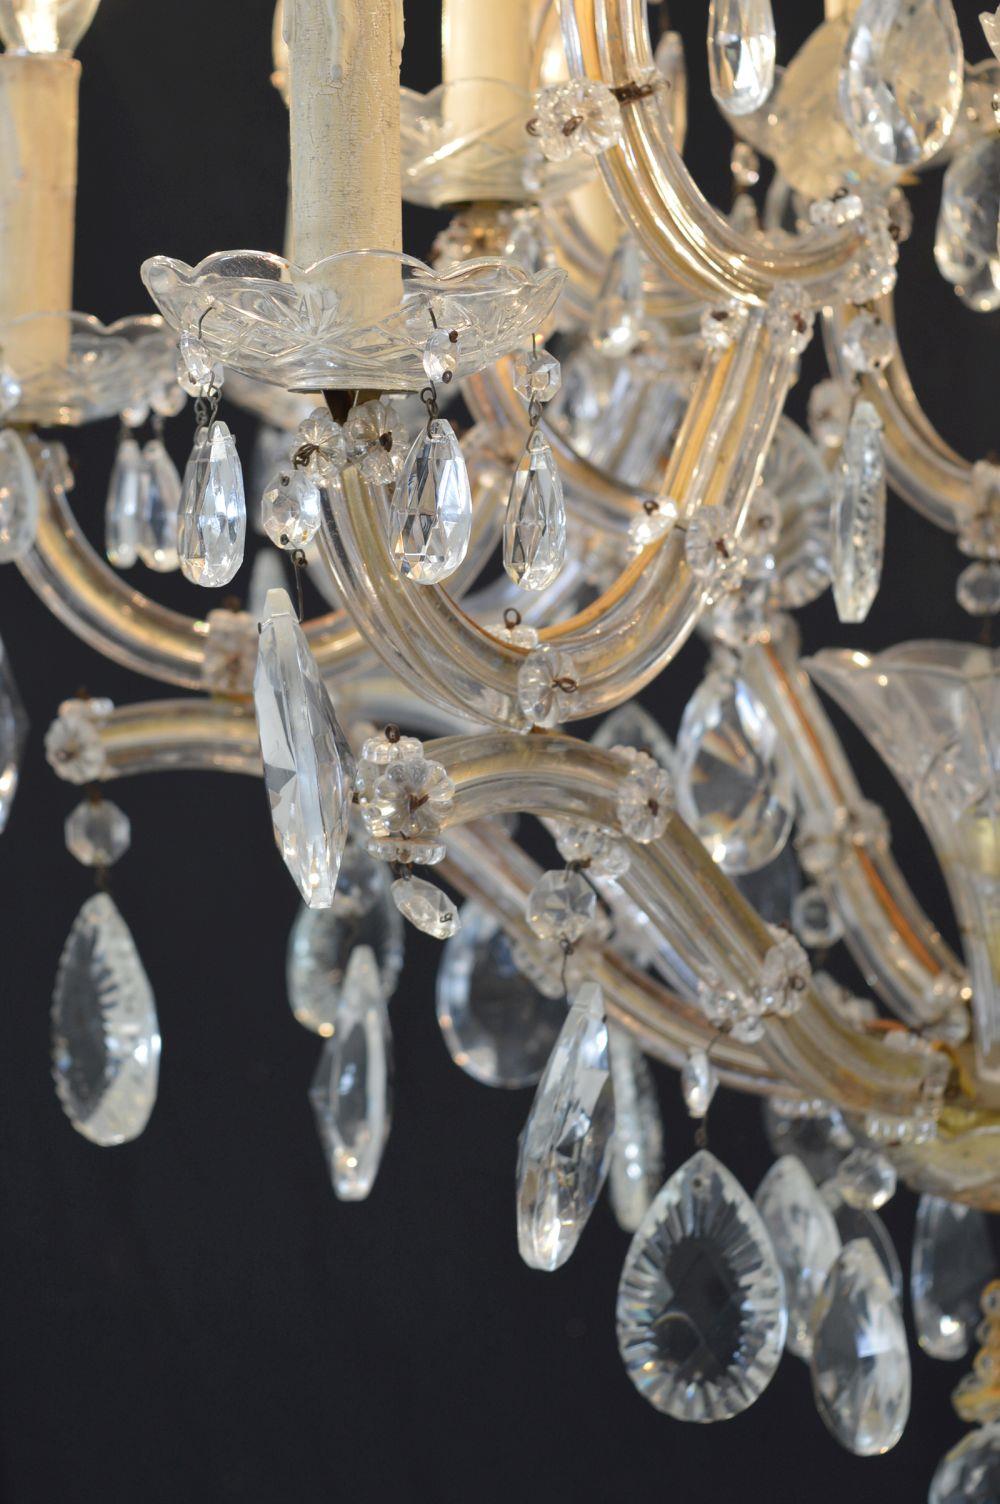 LARGE FRENCH GLASS CHANDELIER - Image 2 of 2